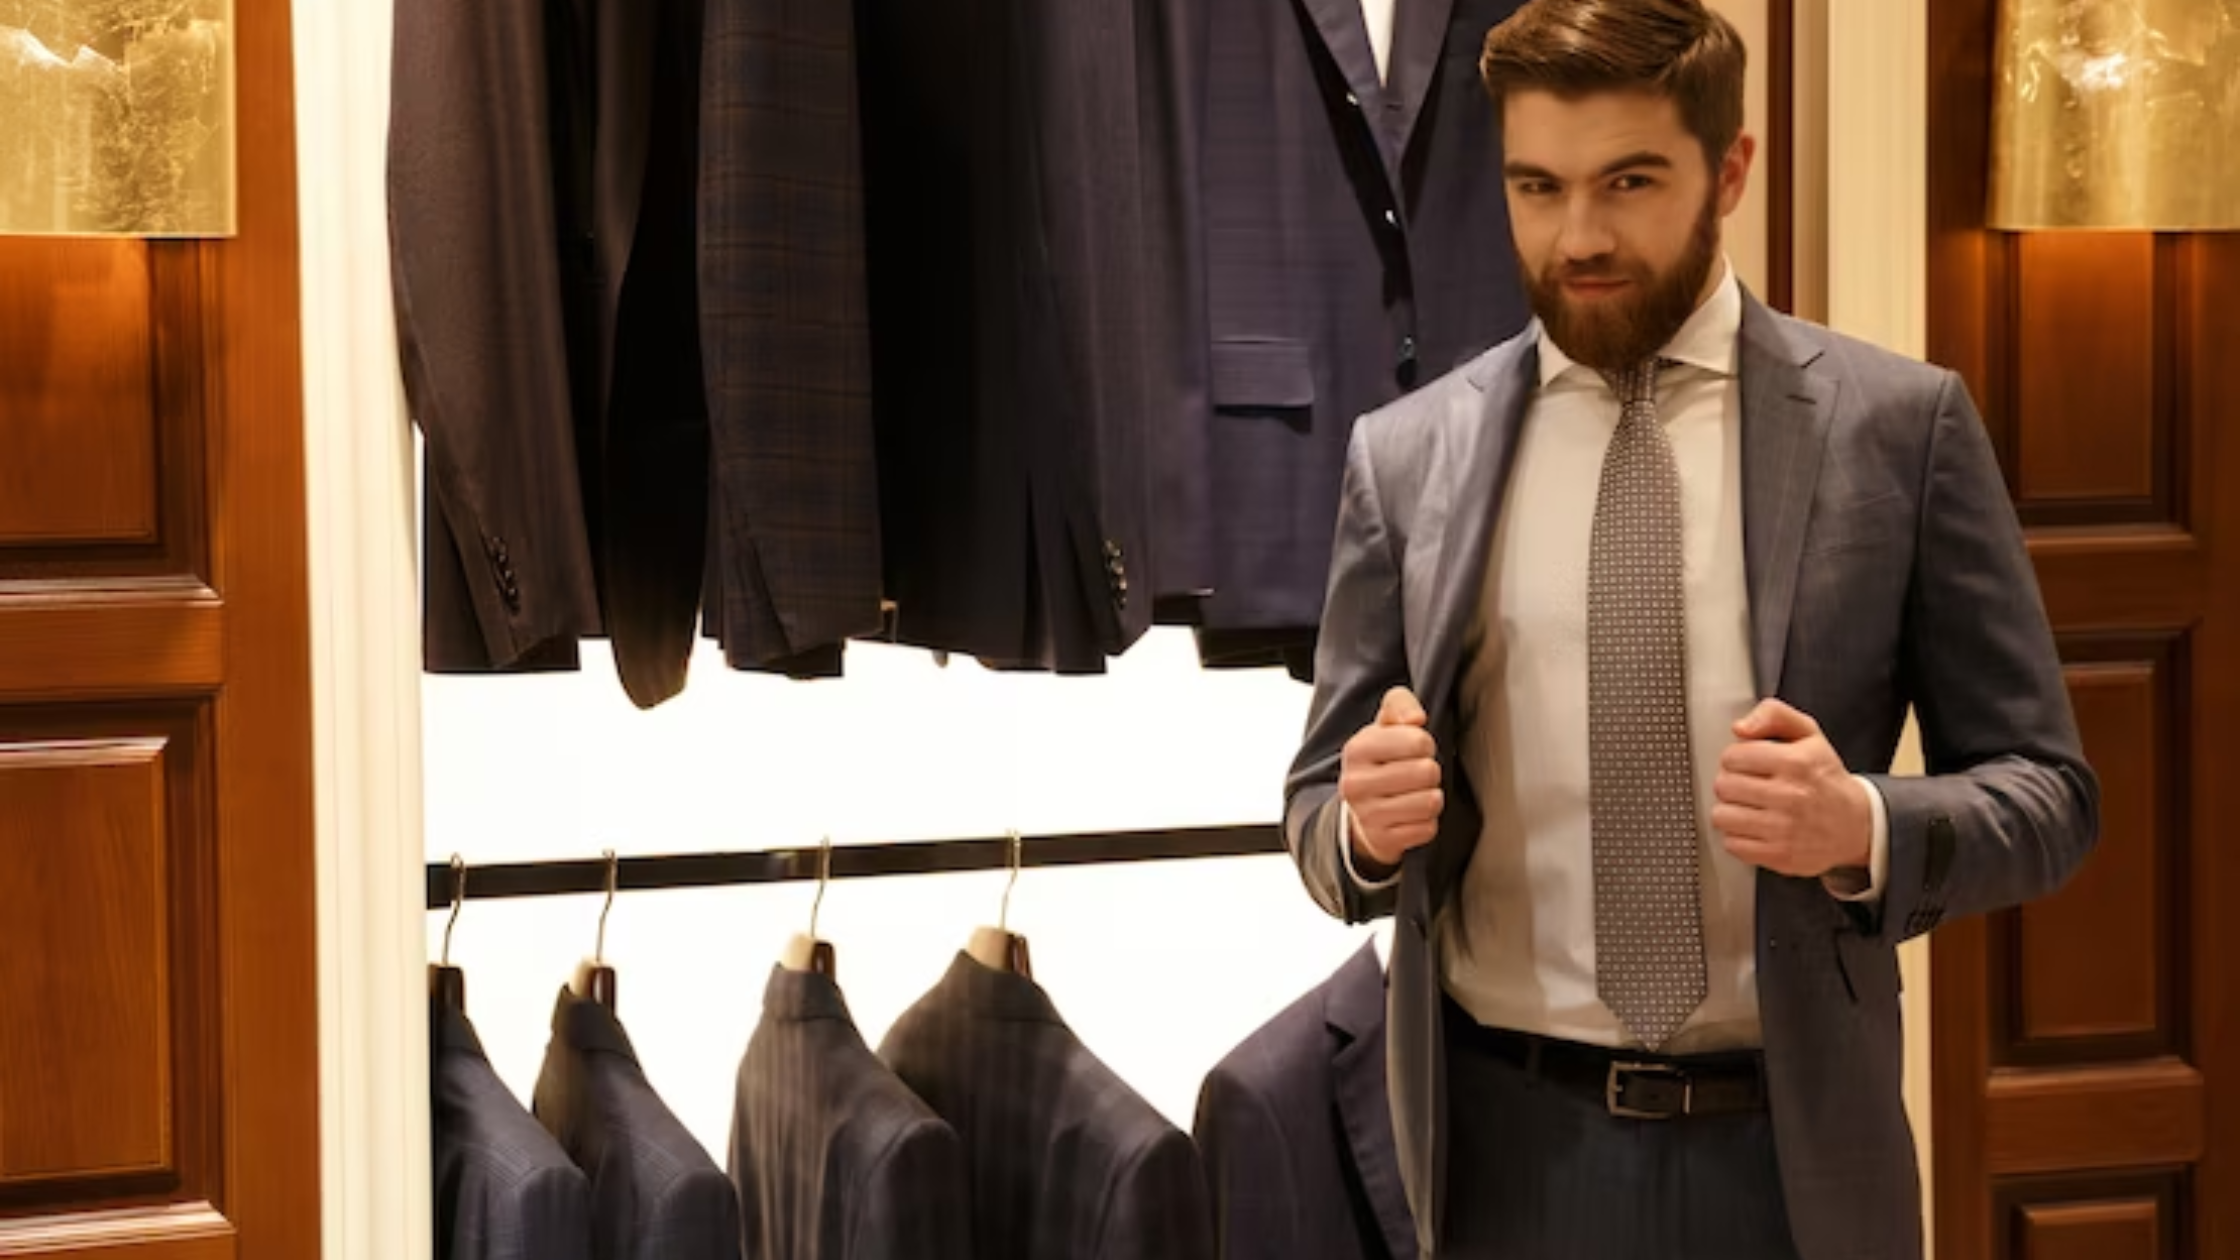 16 Types Of Suits For Men: A Guide To Men’s Suit Styles